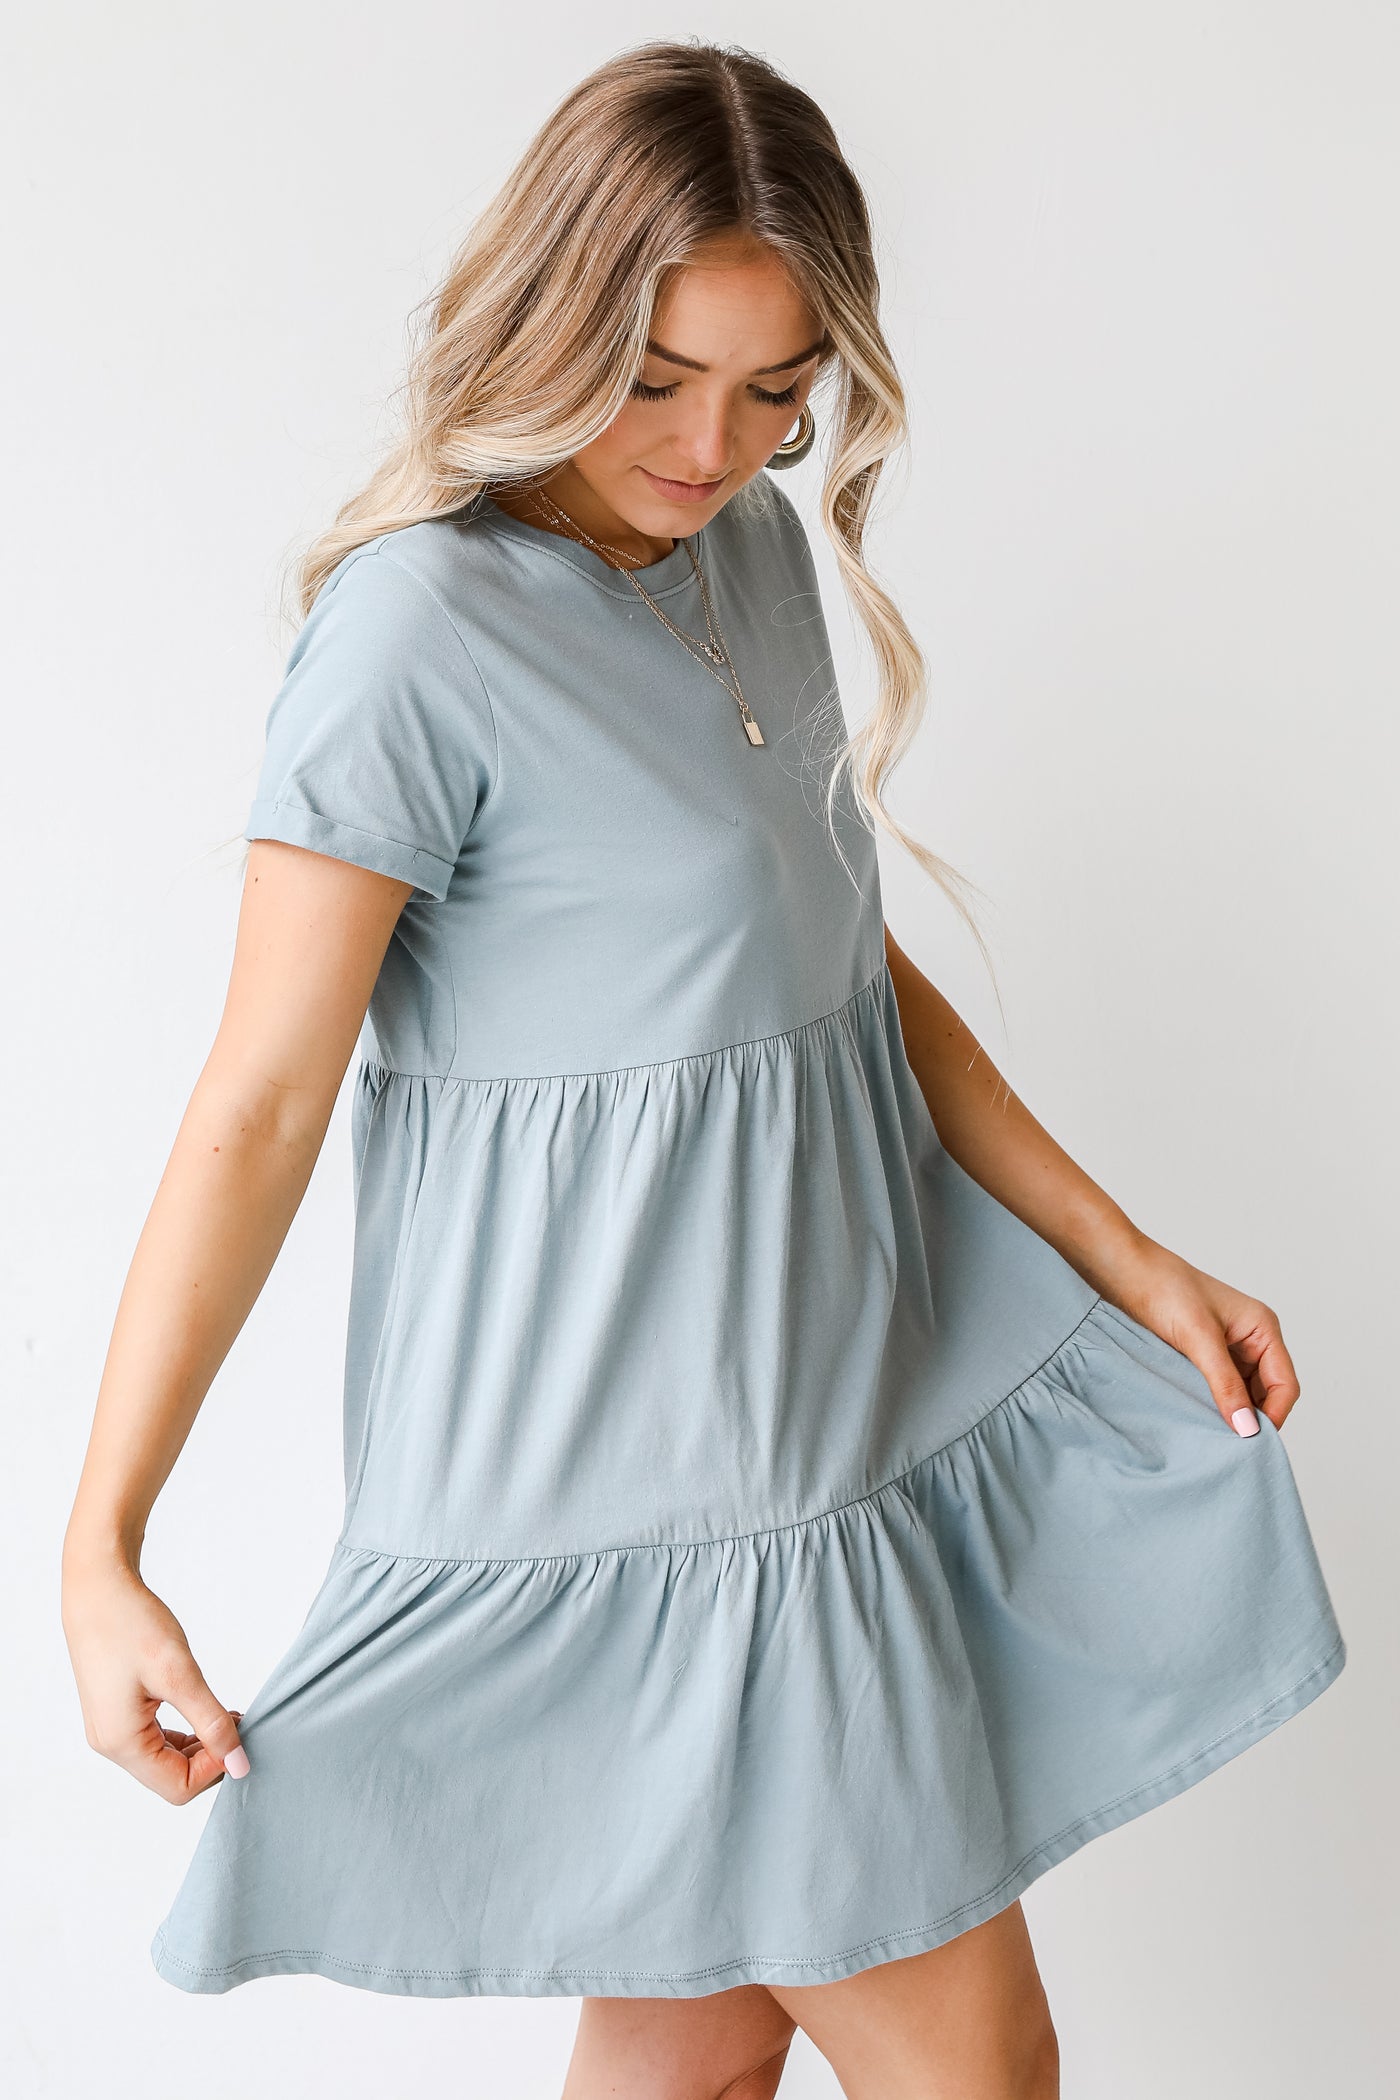 Tiered Babydoll Dress side view